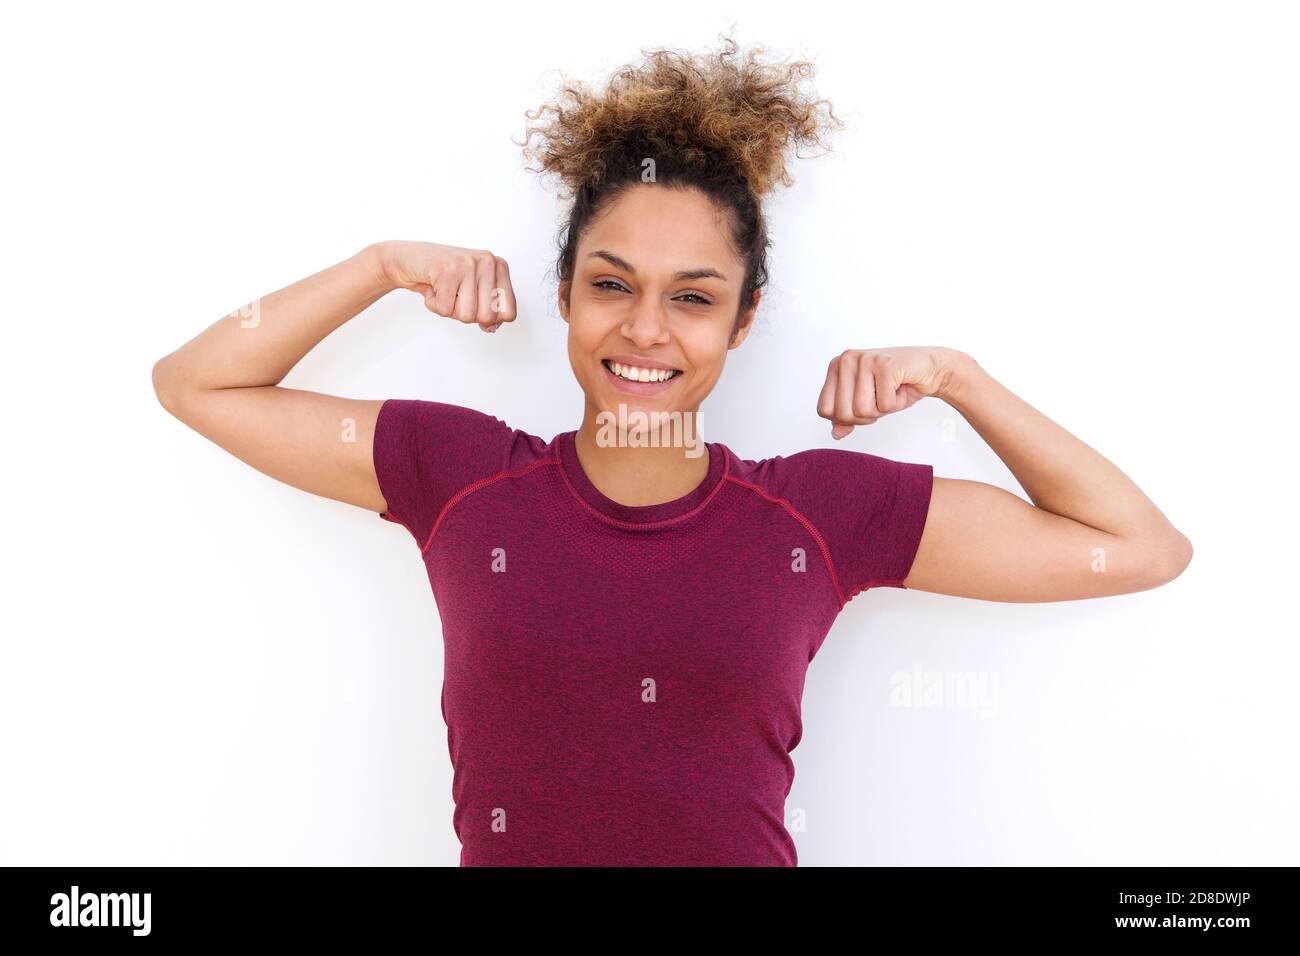 Smiling Black Woman Flexes Her Bicep Over White Background Stock Photo,  Picture and Royalty Free Image. Image 14738048.